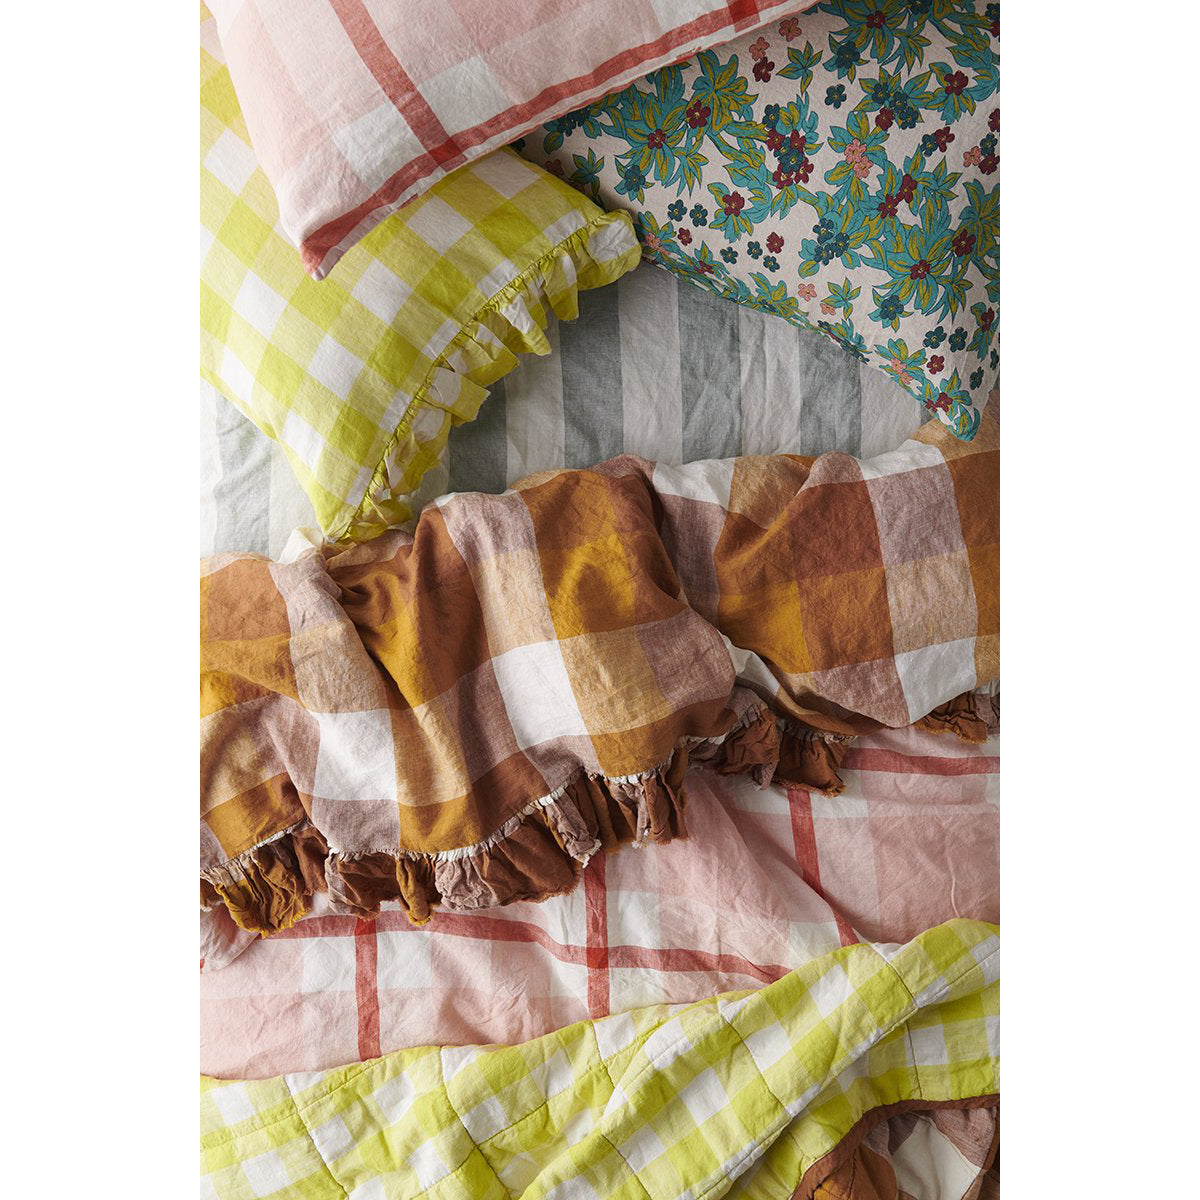 Society of wanderers Turmeric Pillowcase Sets French Linen